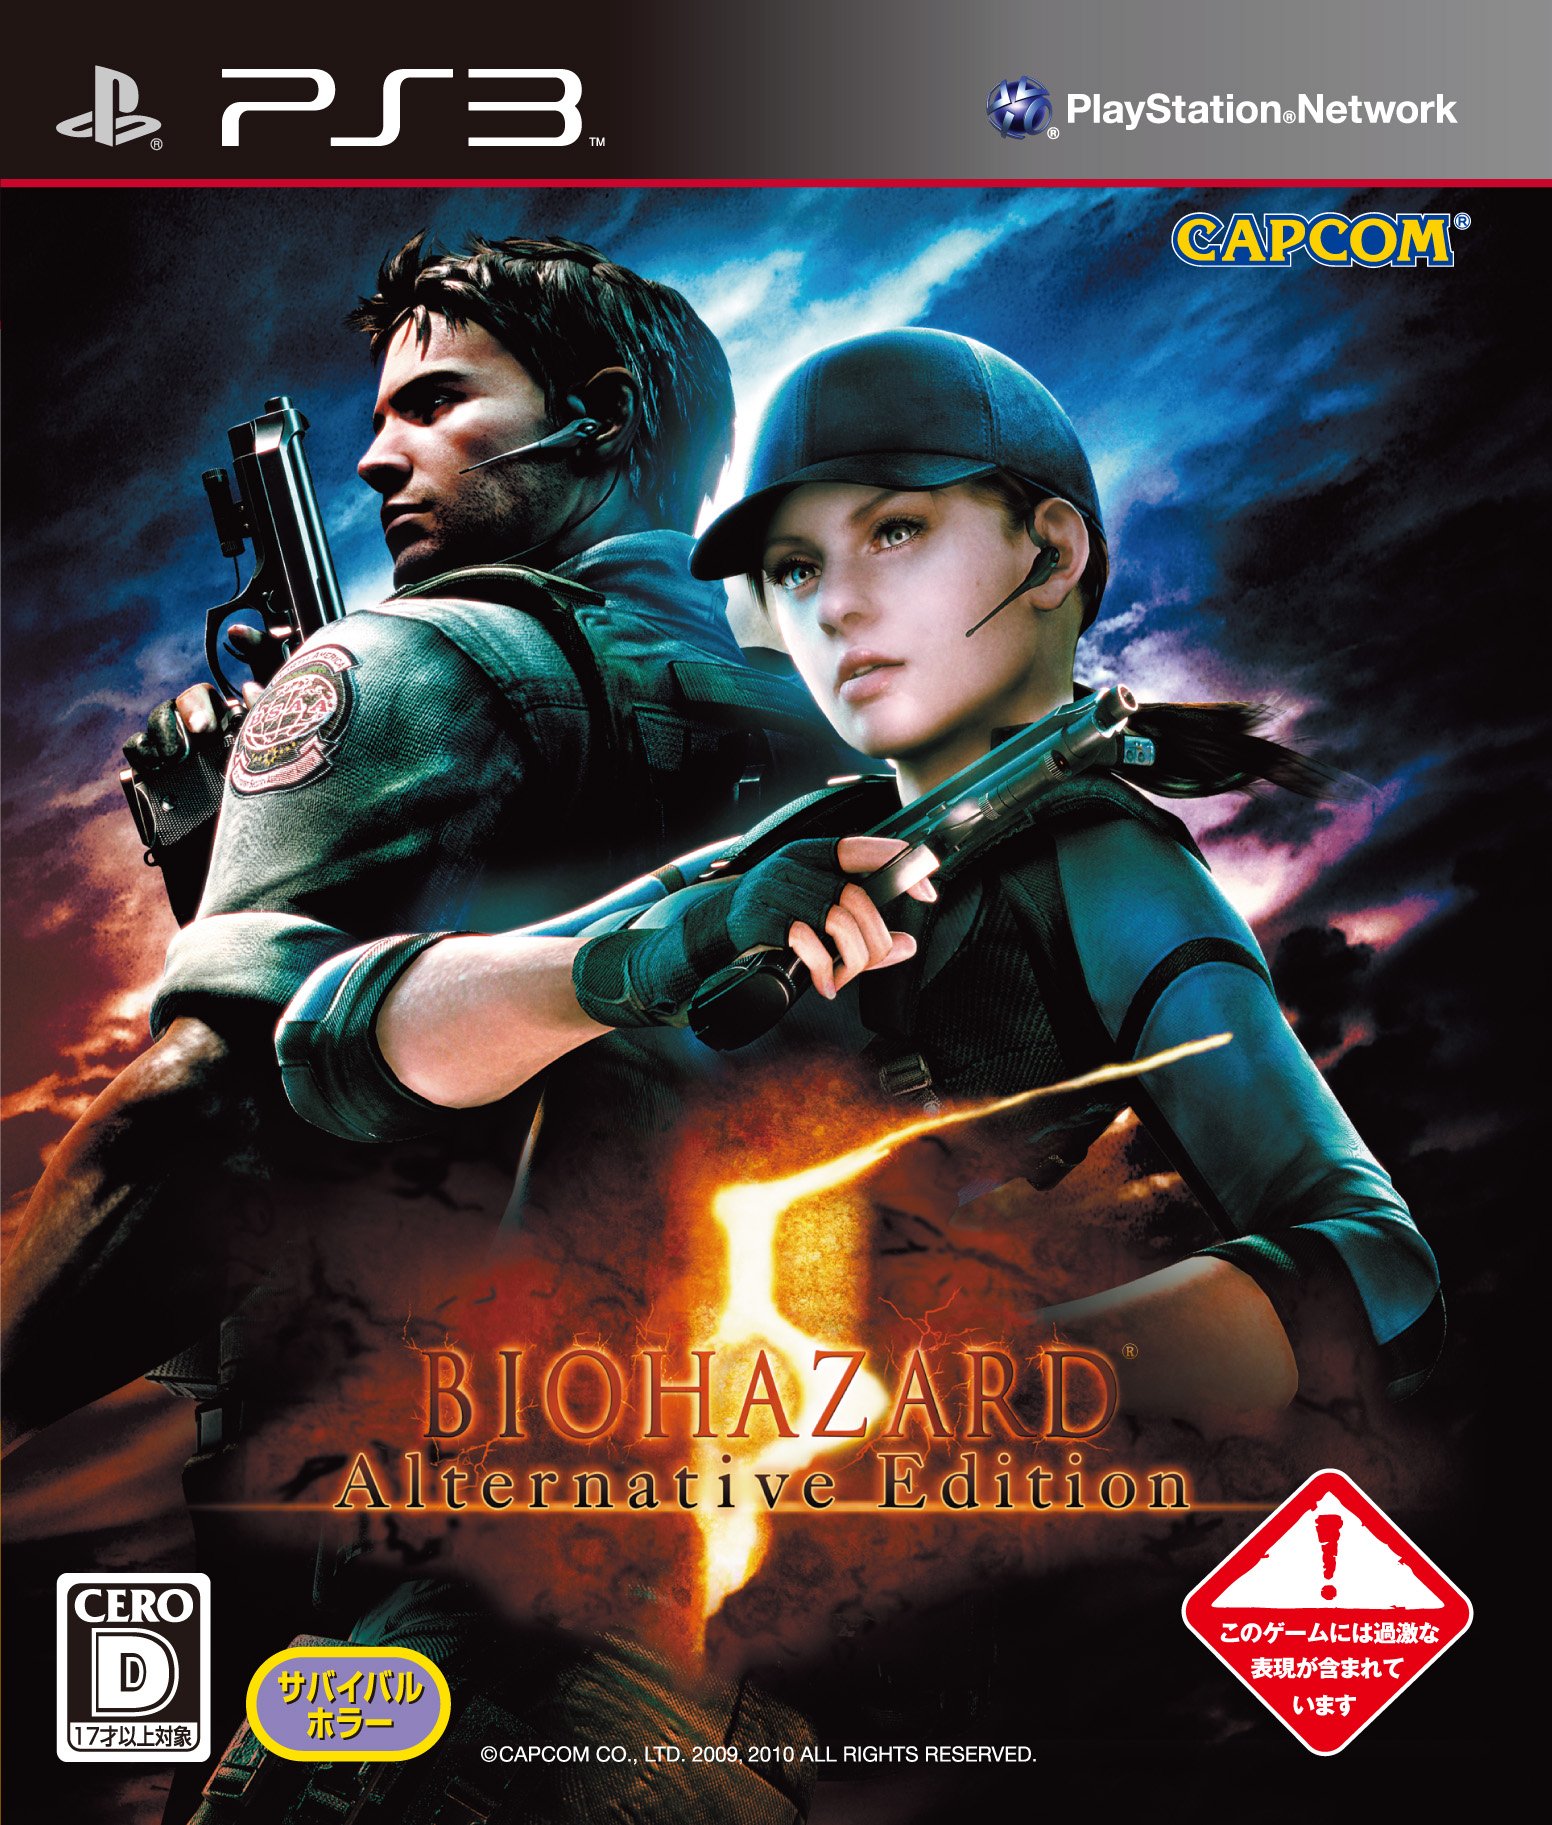 Resident Evil 5 - Standard Edition - PlayStation 4 : Capcom U S A Inc:  Video Games, resident evil 5 characters